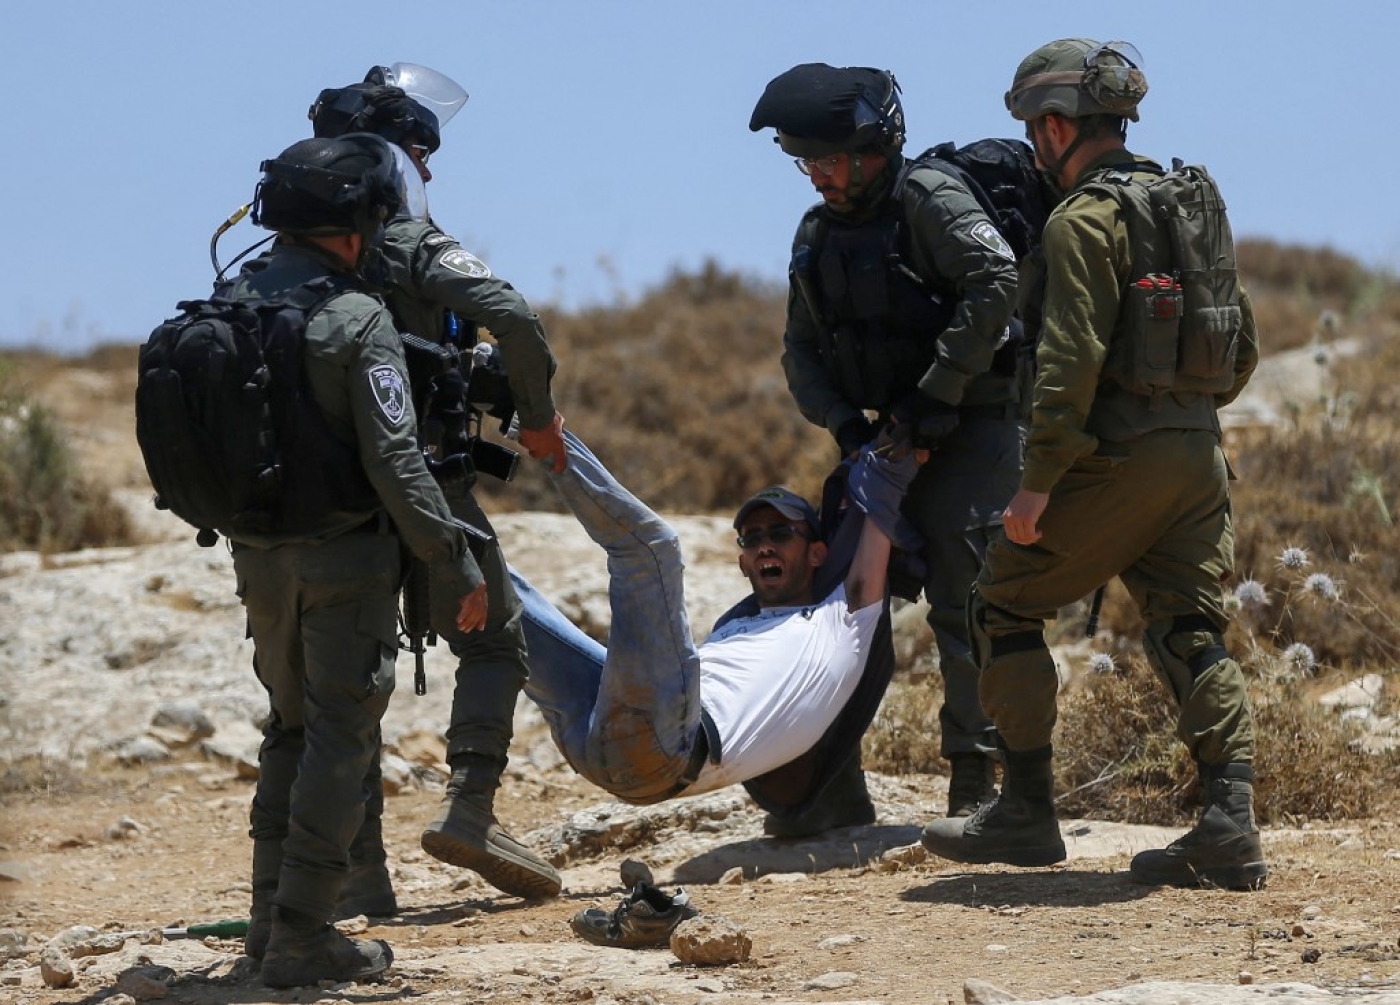 Israeli forces remove a protester during a demonstration by Palestinians in Masafer Yatta, in the Israeli-occupied West Bank, 1 July 2022 (AFP)